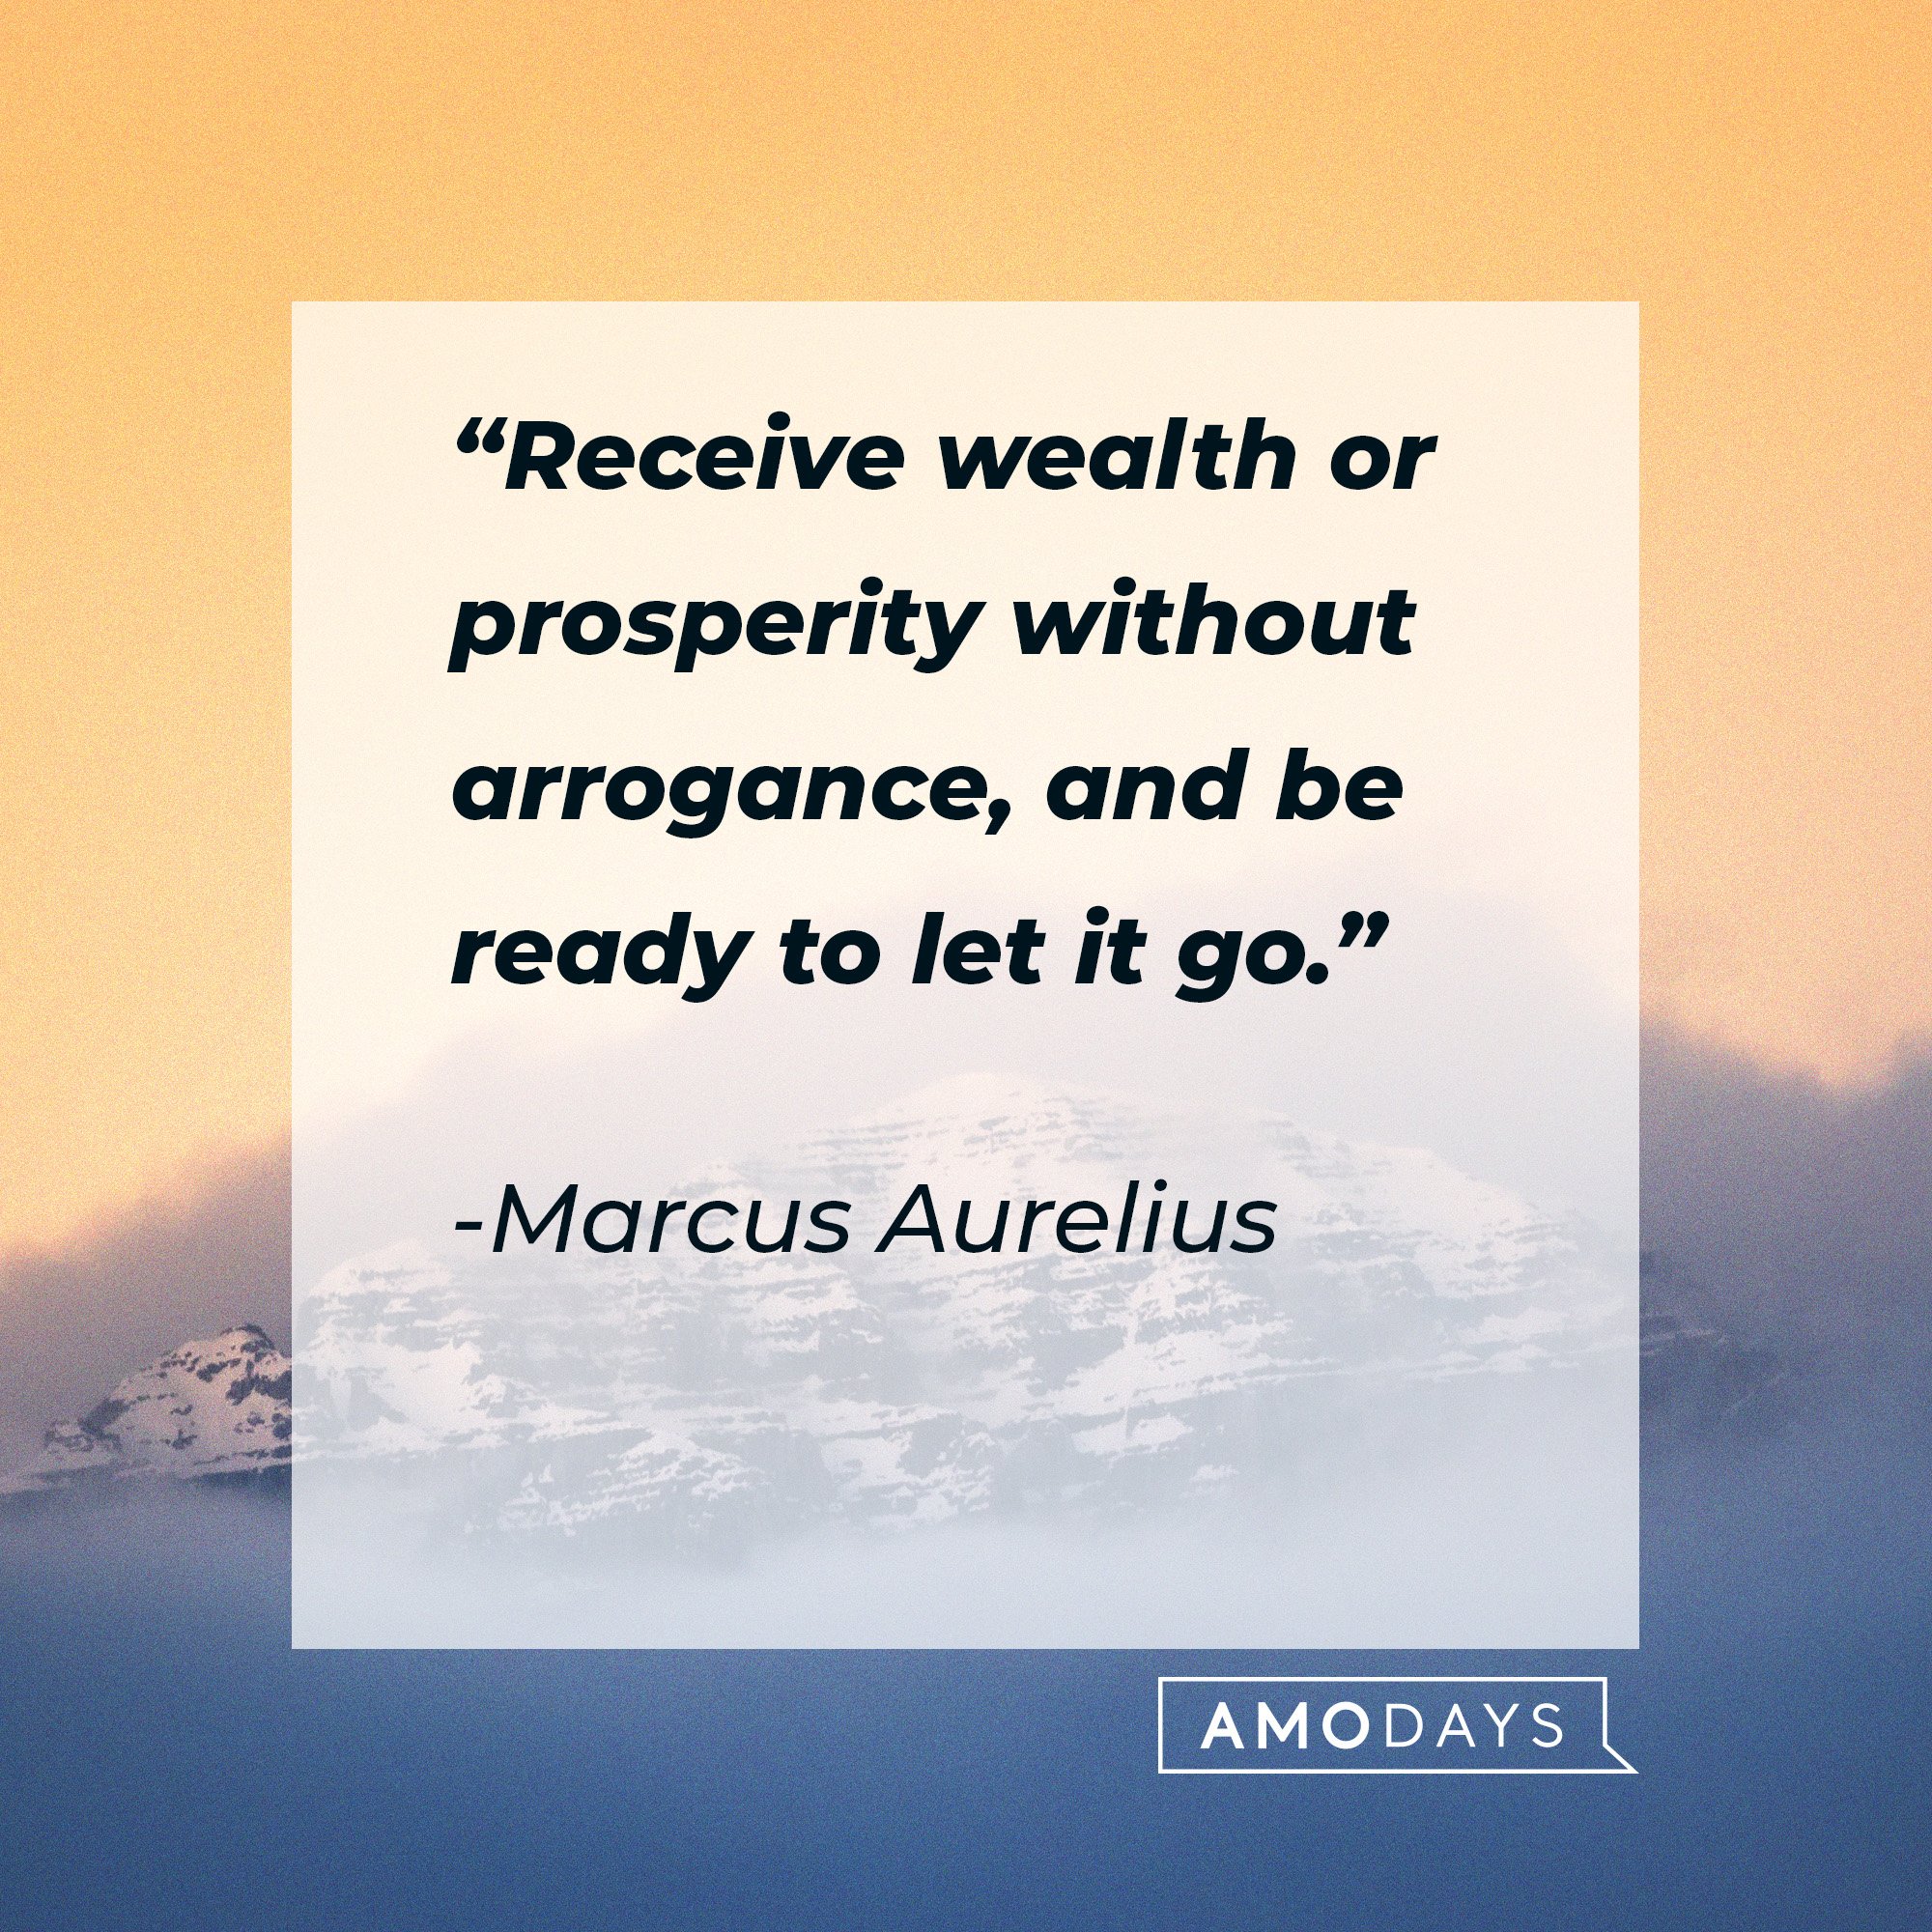 Marcus Aurelius's quote: “Receive wealth or prosperity without arrogance, and be ready to let it go.” | Image: AmoDays